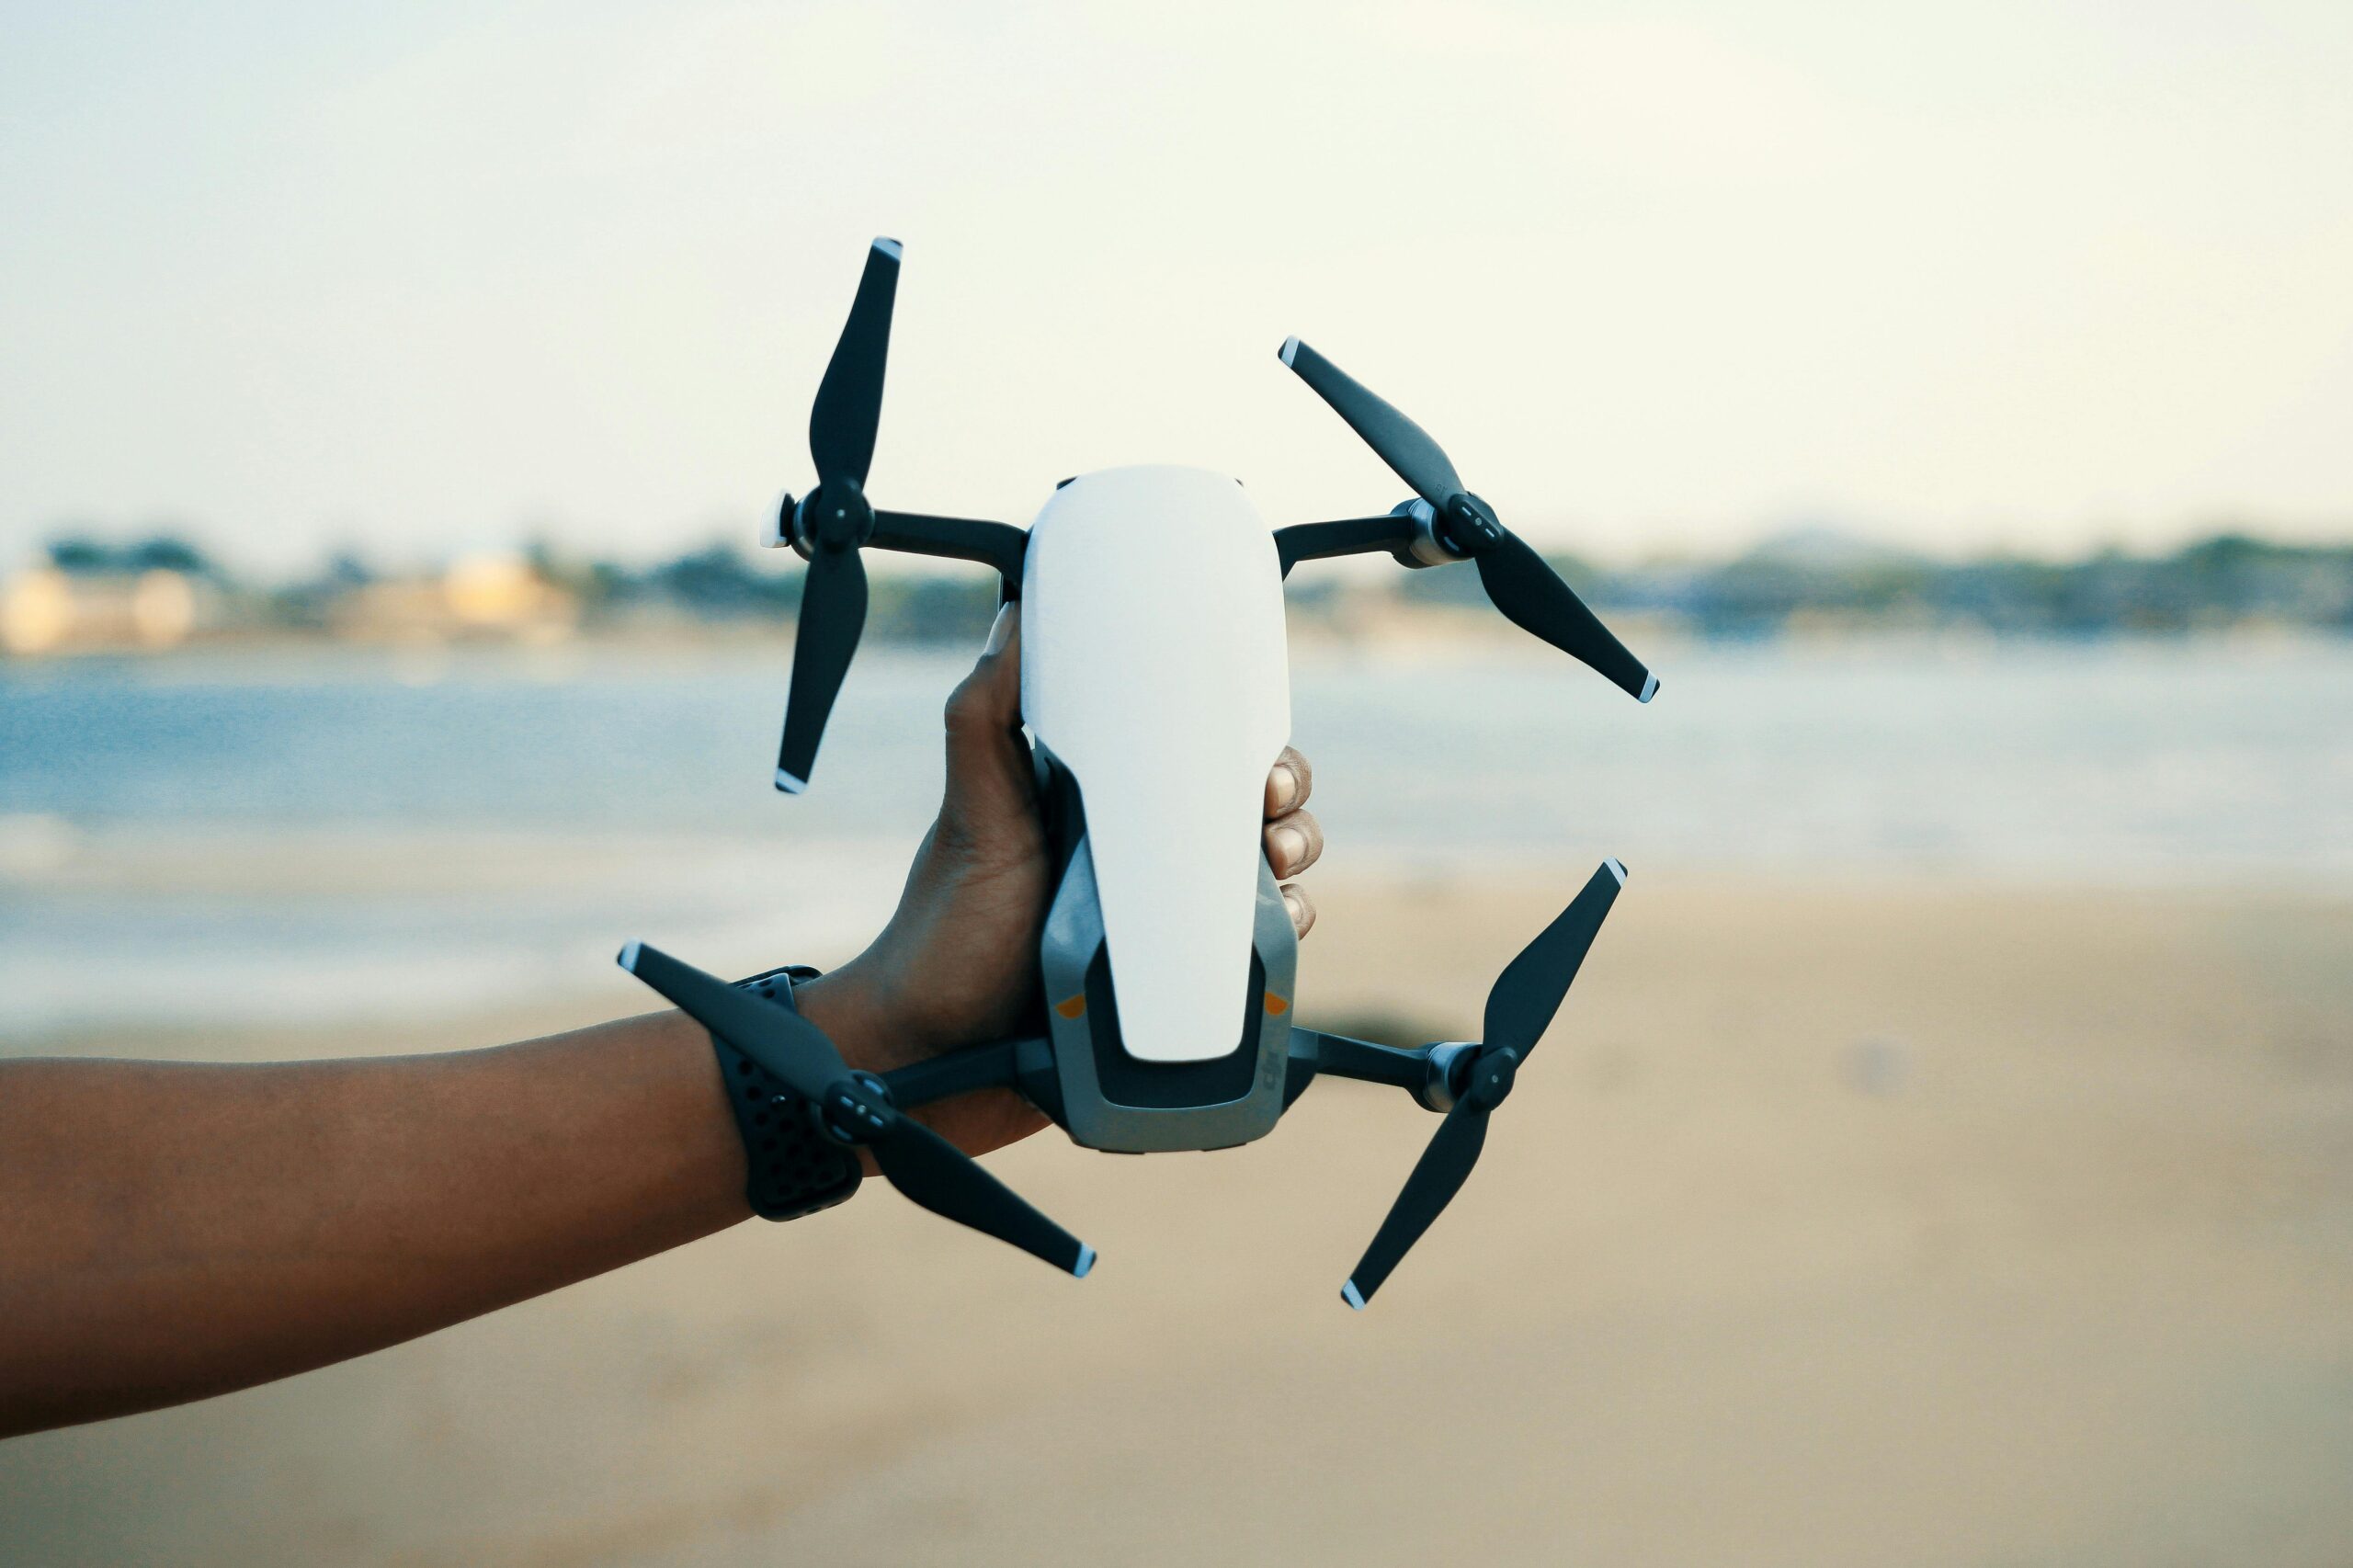 Drones for Beginners